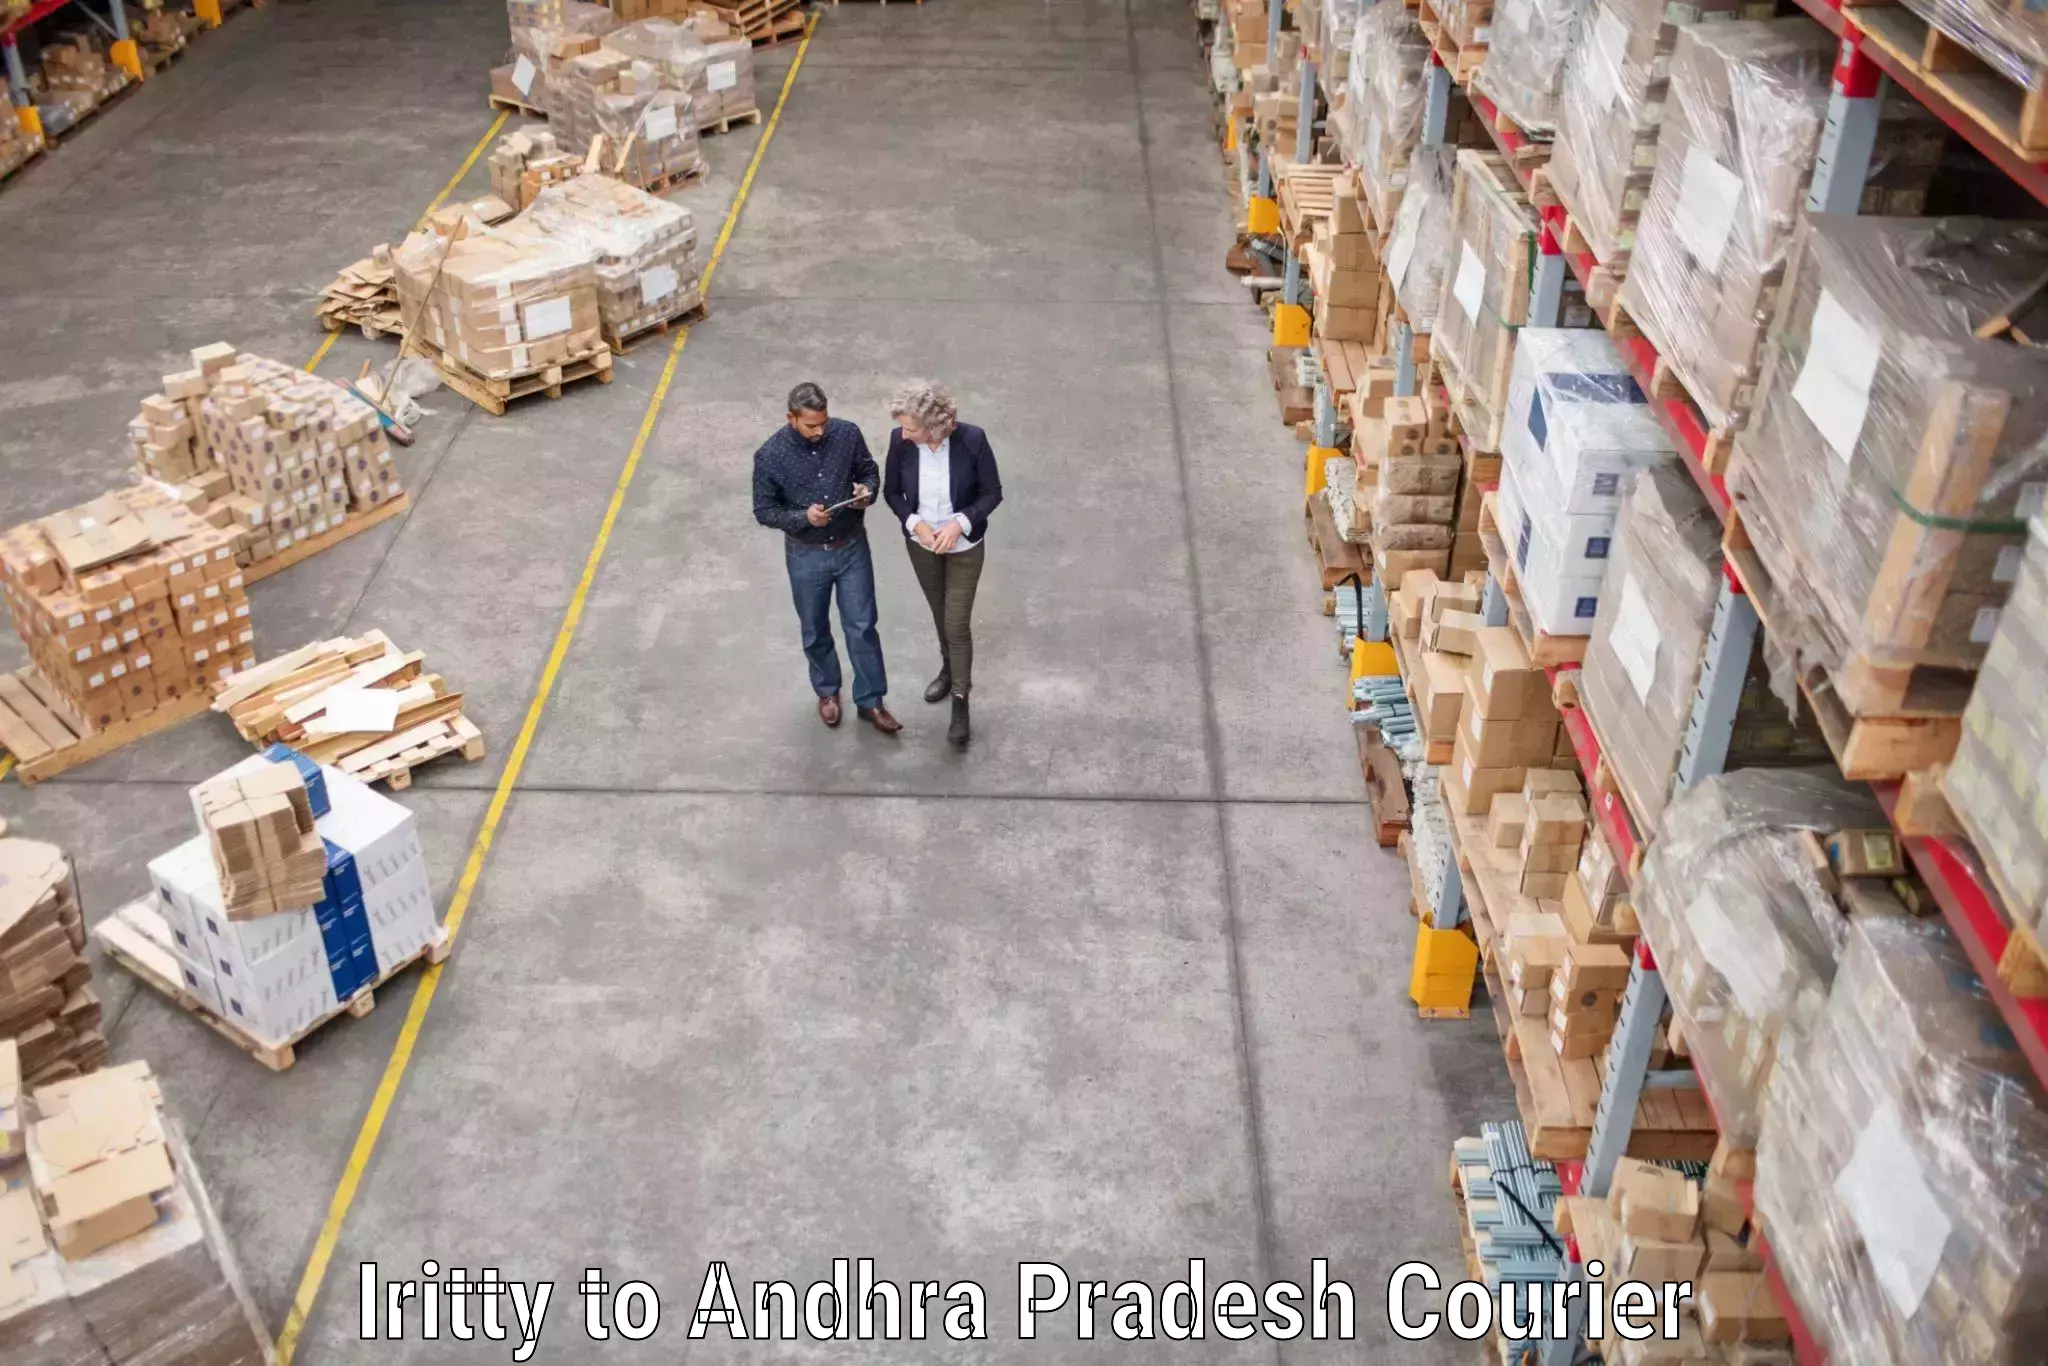 Efficient packing and moving Iritty to Andhra Pradesh